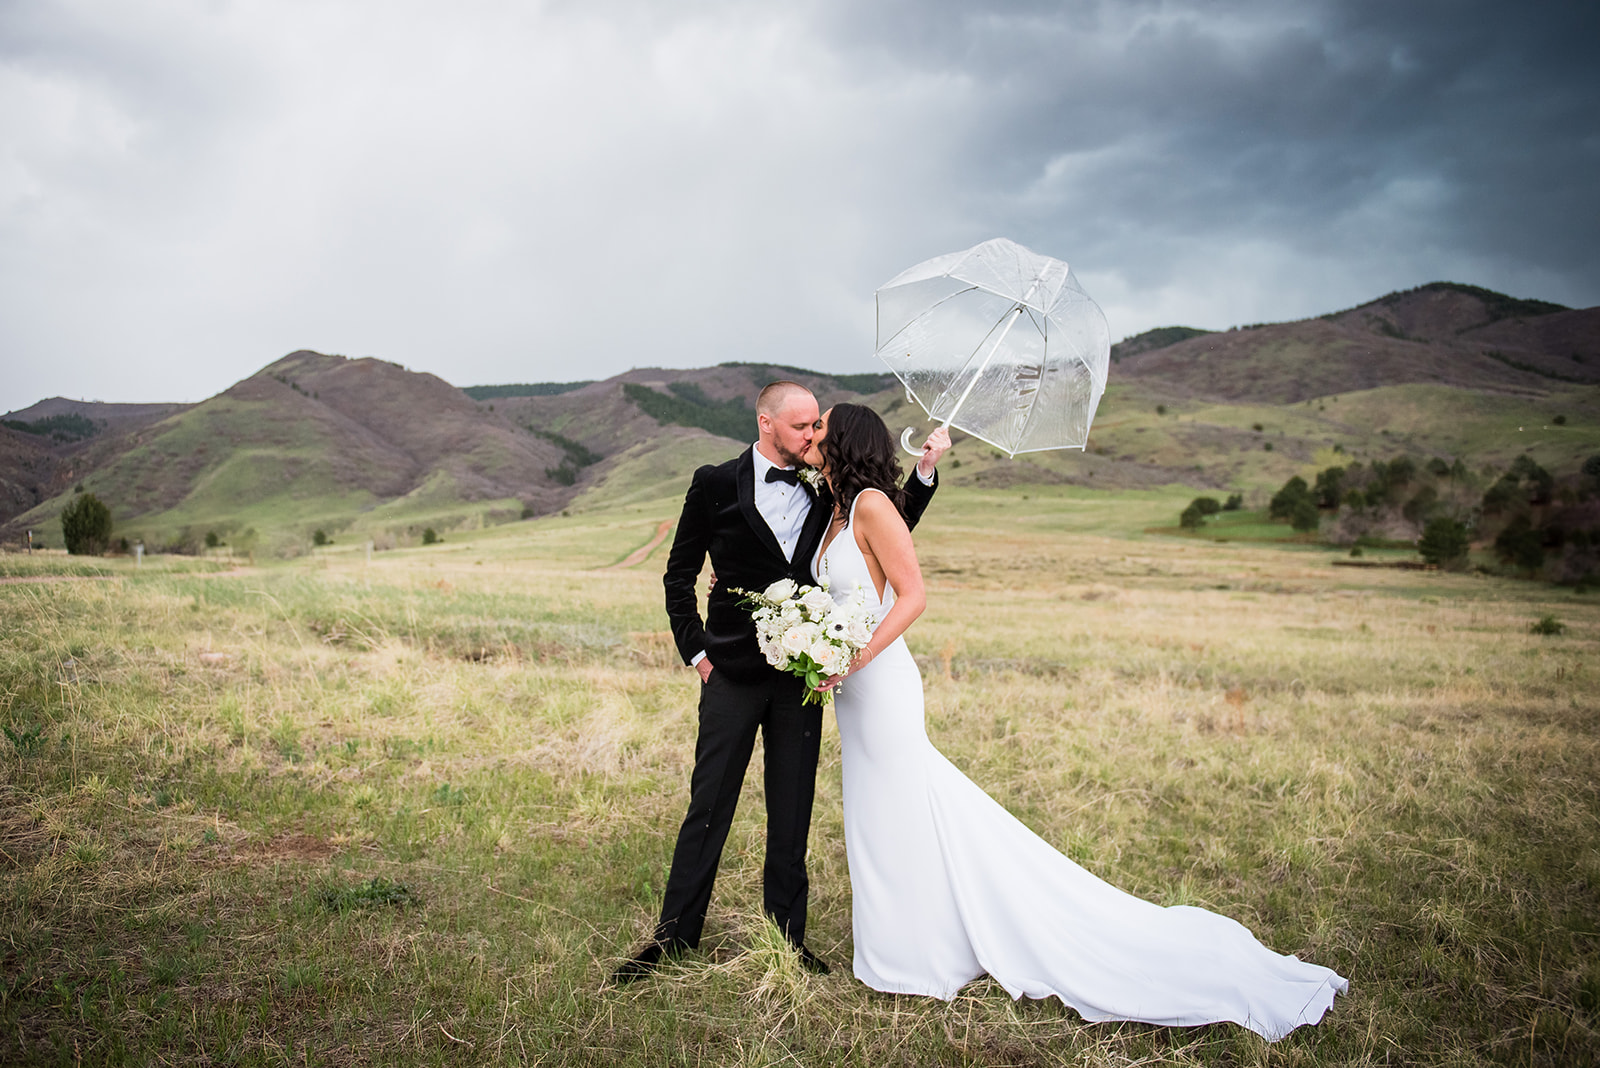 Bride and groom share a kiss in front of the rolling hills of Colorado while groom holds umbrella over them.